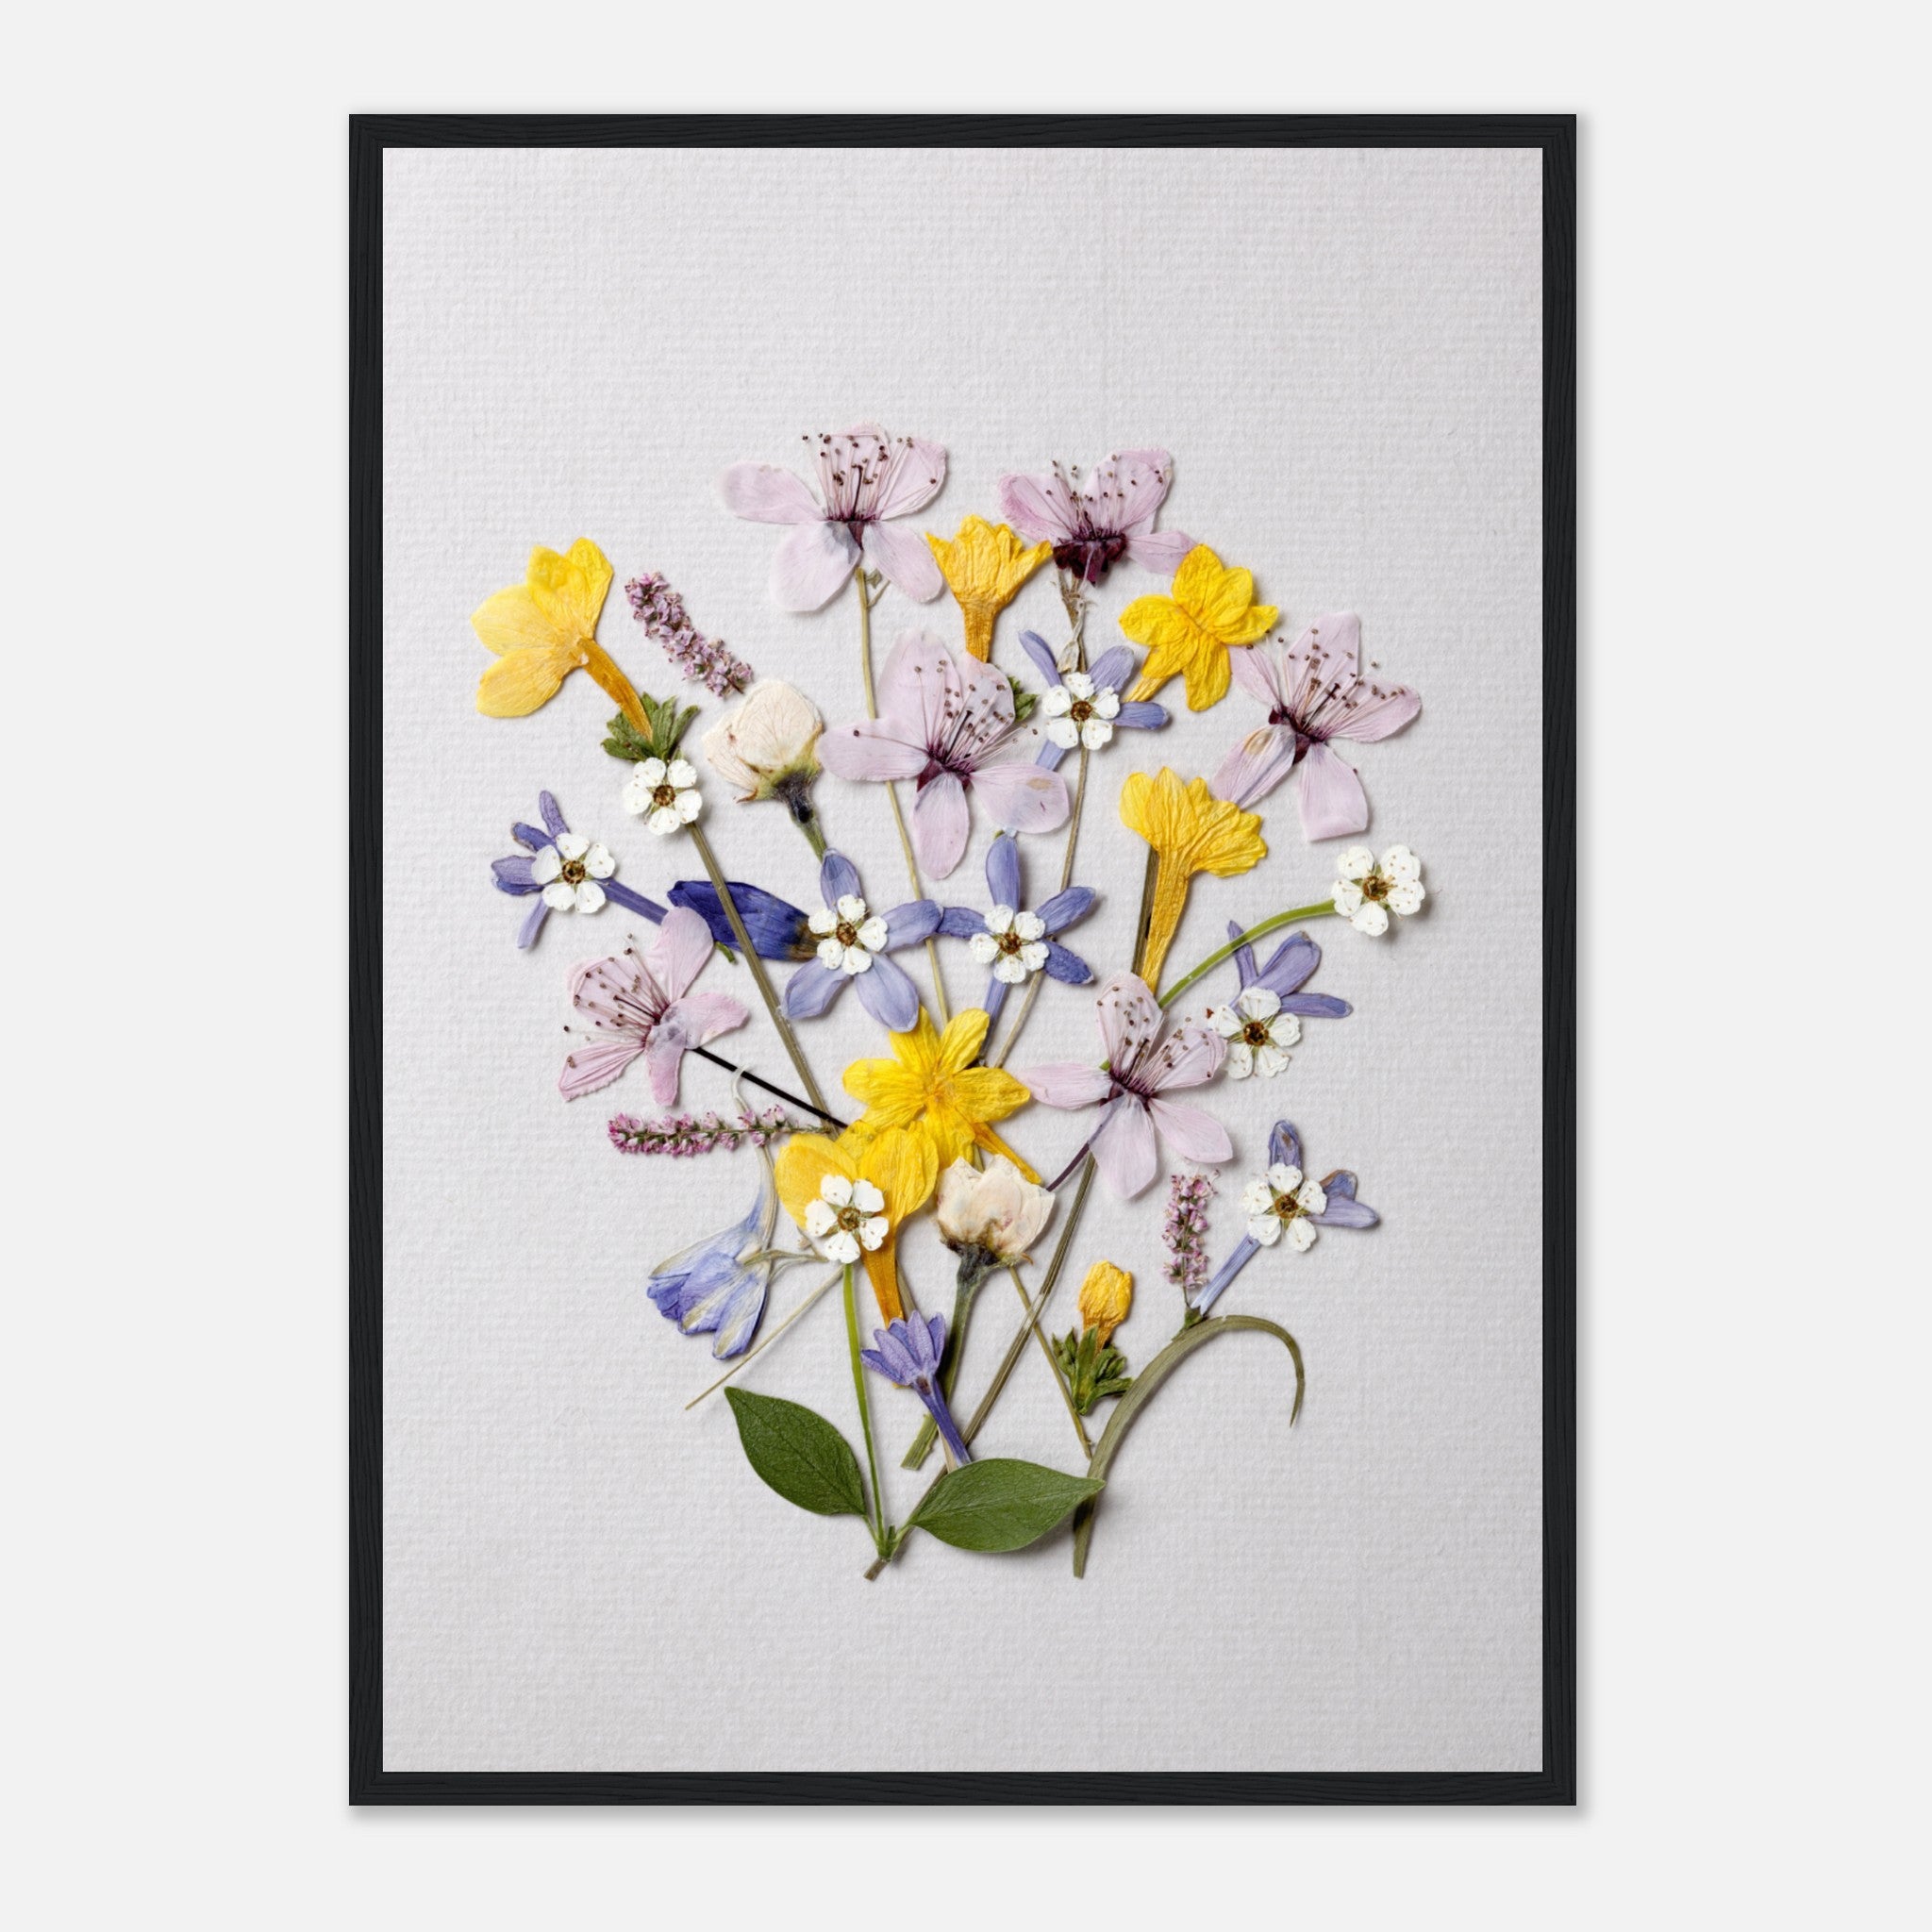 Dried Flowers On Textured Paper 6 Poster